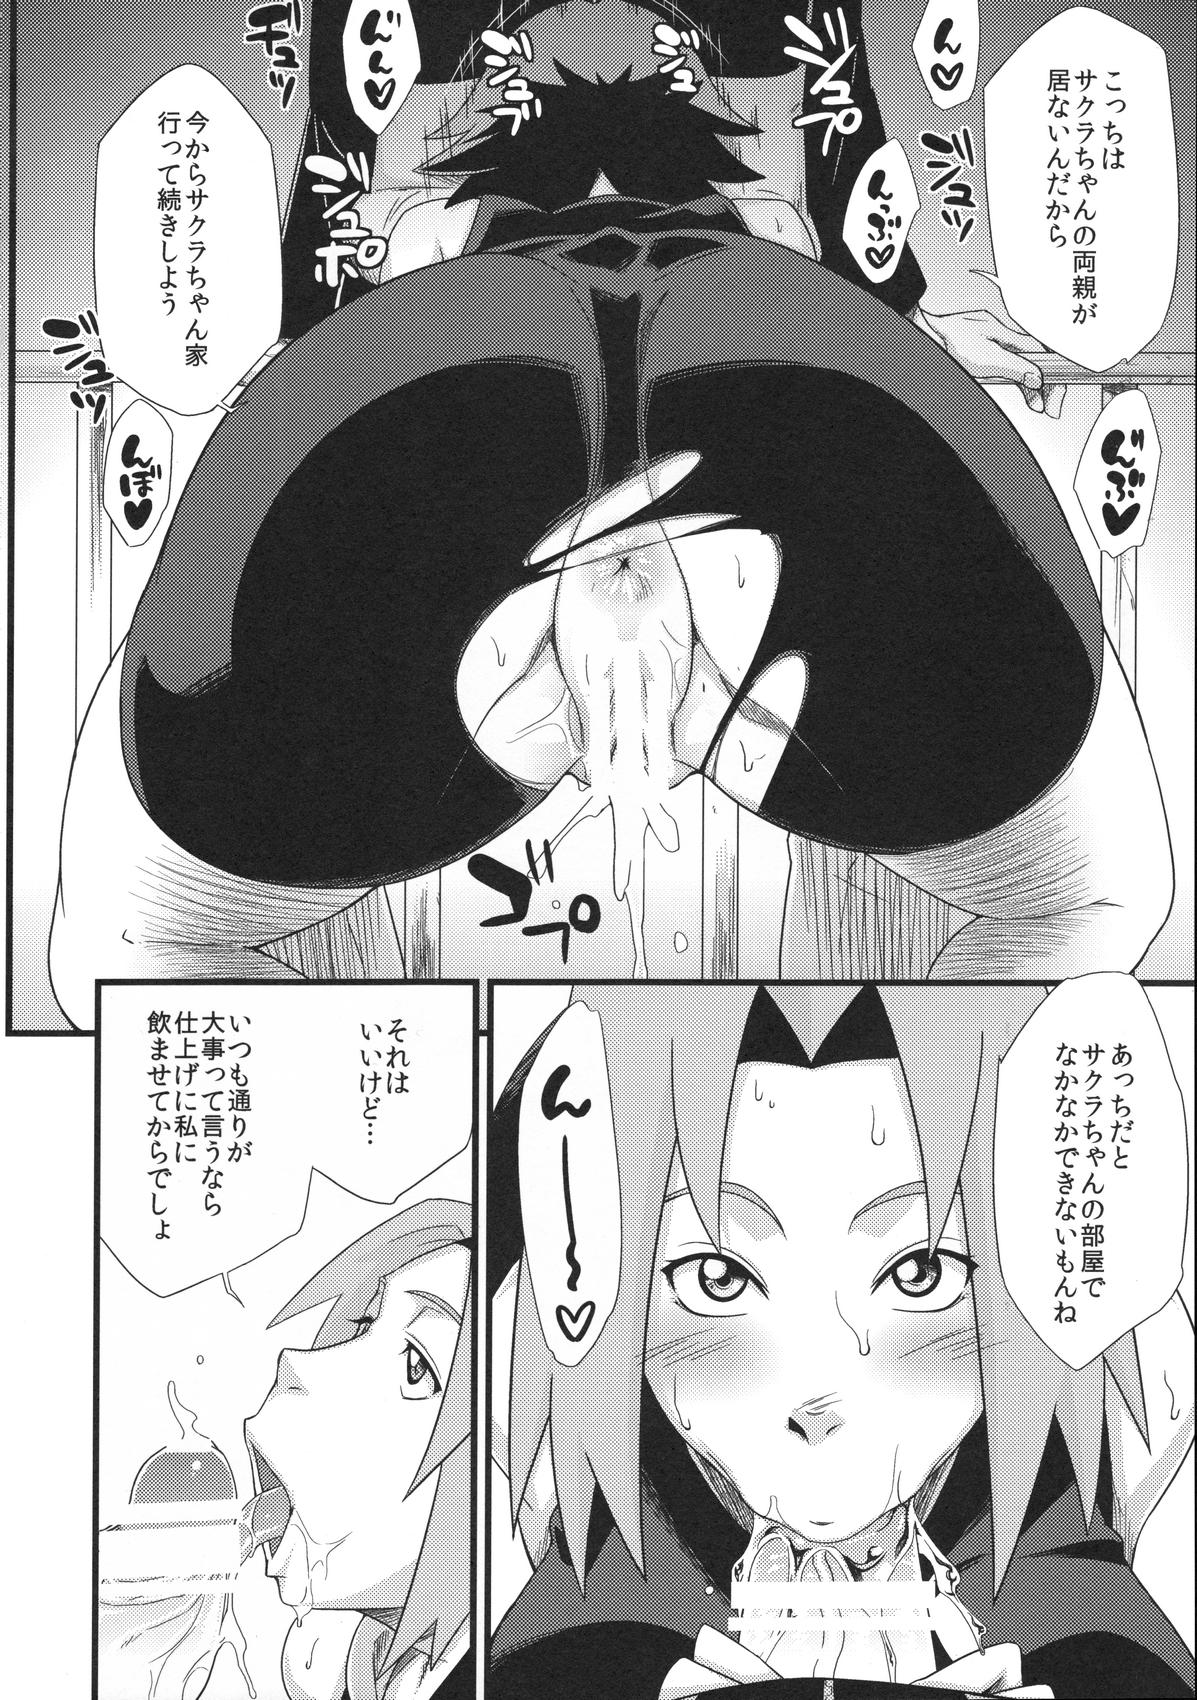 Haouju 2 Page 26 Of 97 naruto uncensored hentai, Haouju 2 Page 26 Of 97 nar...